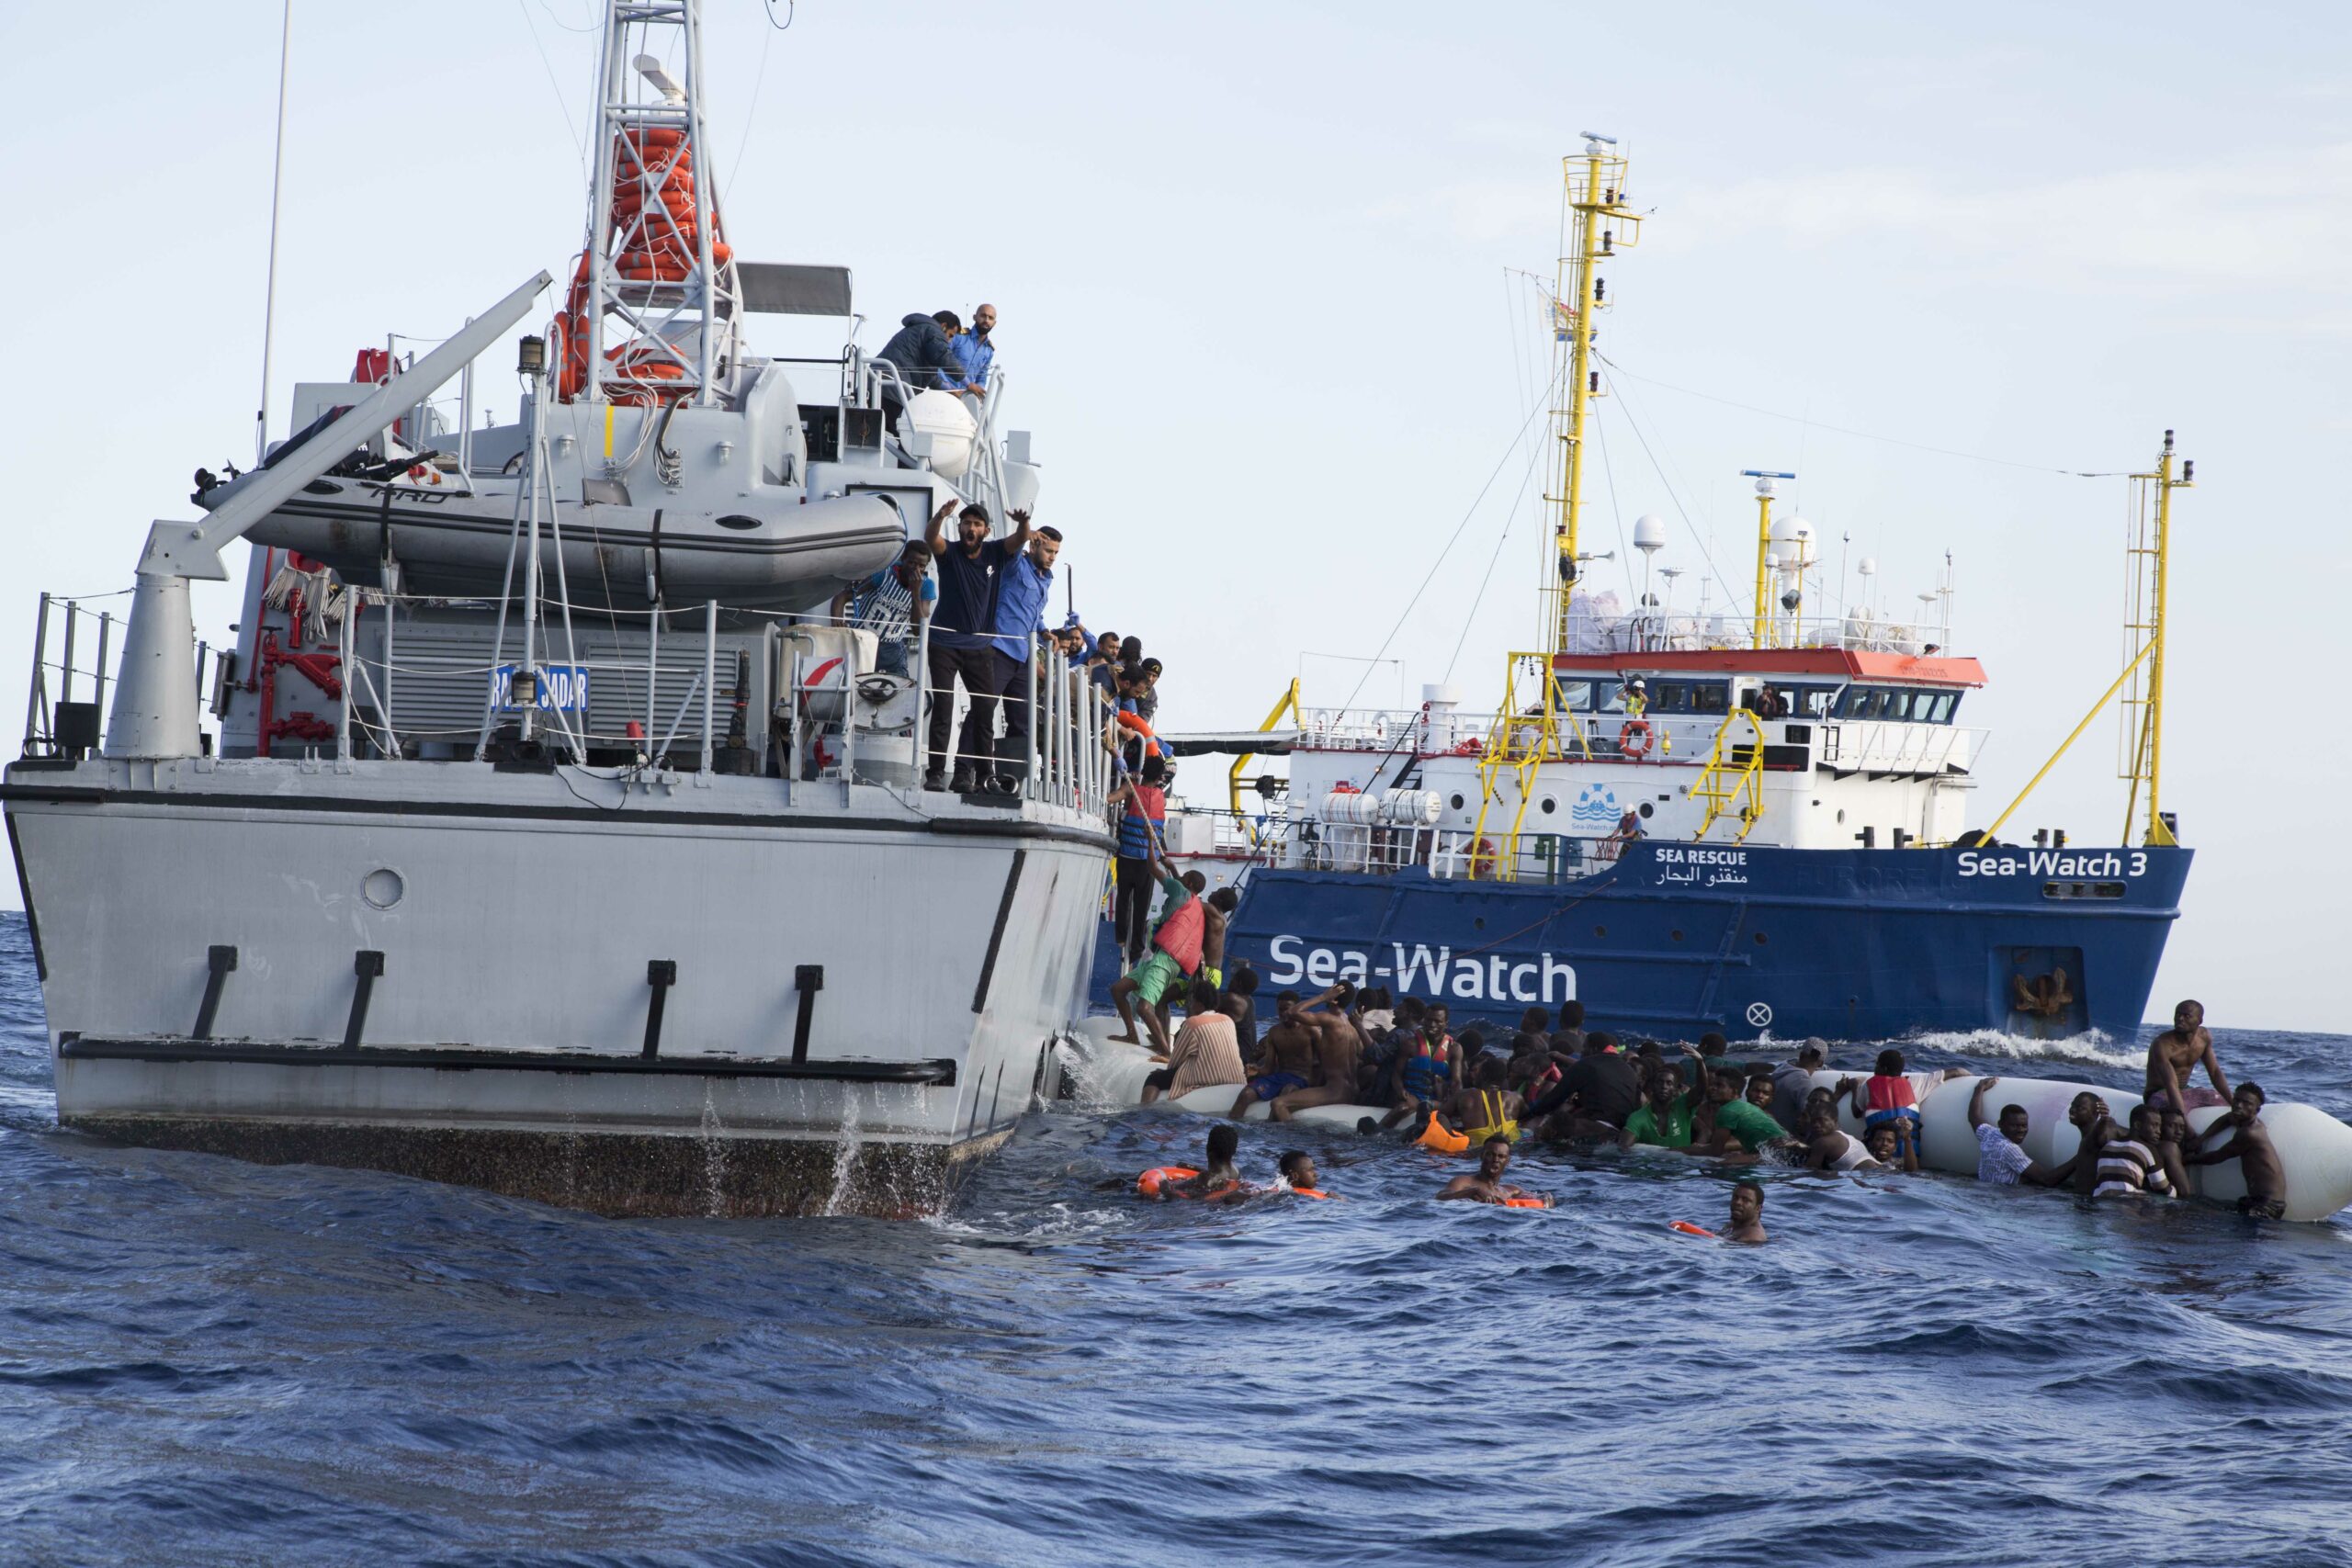 WhatsApp to Libya: How Frontex uses a trick to circumvent international law